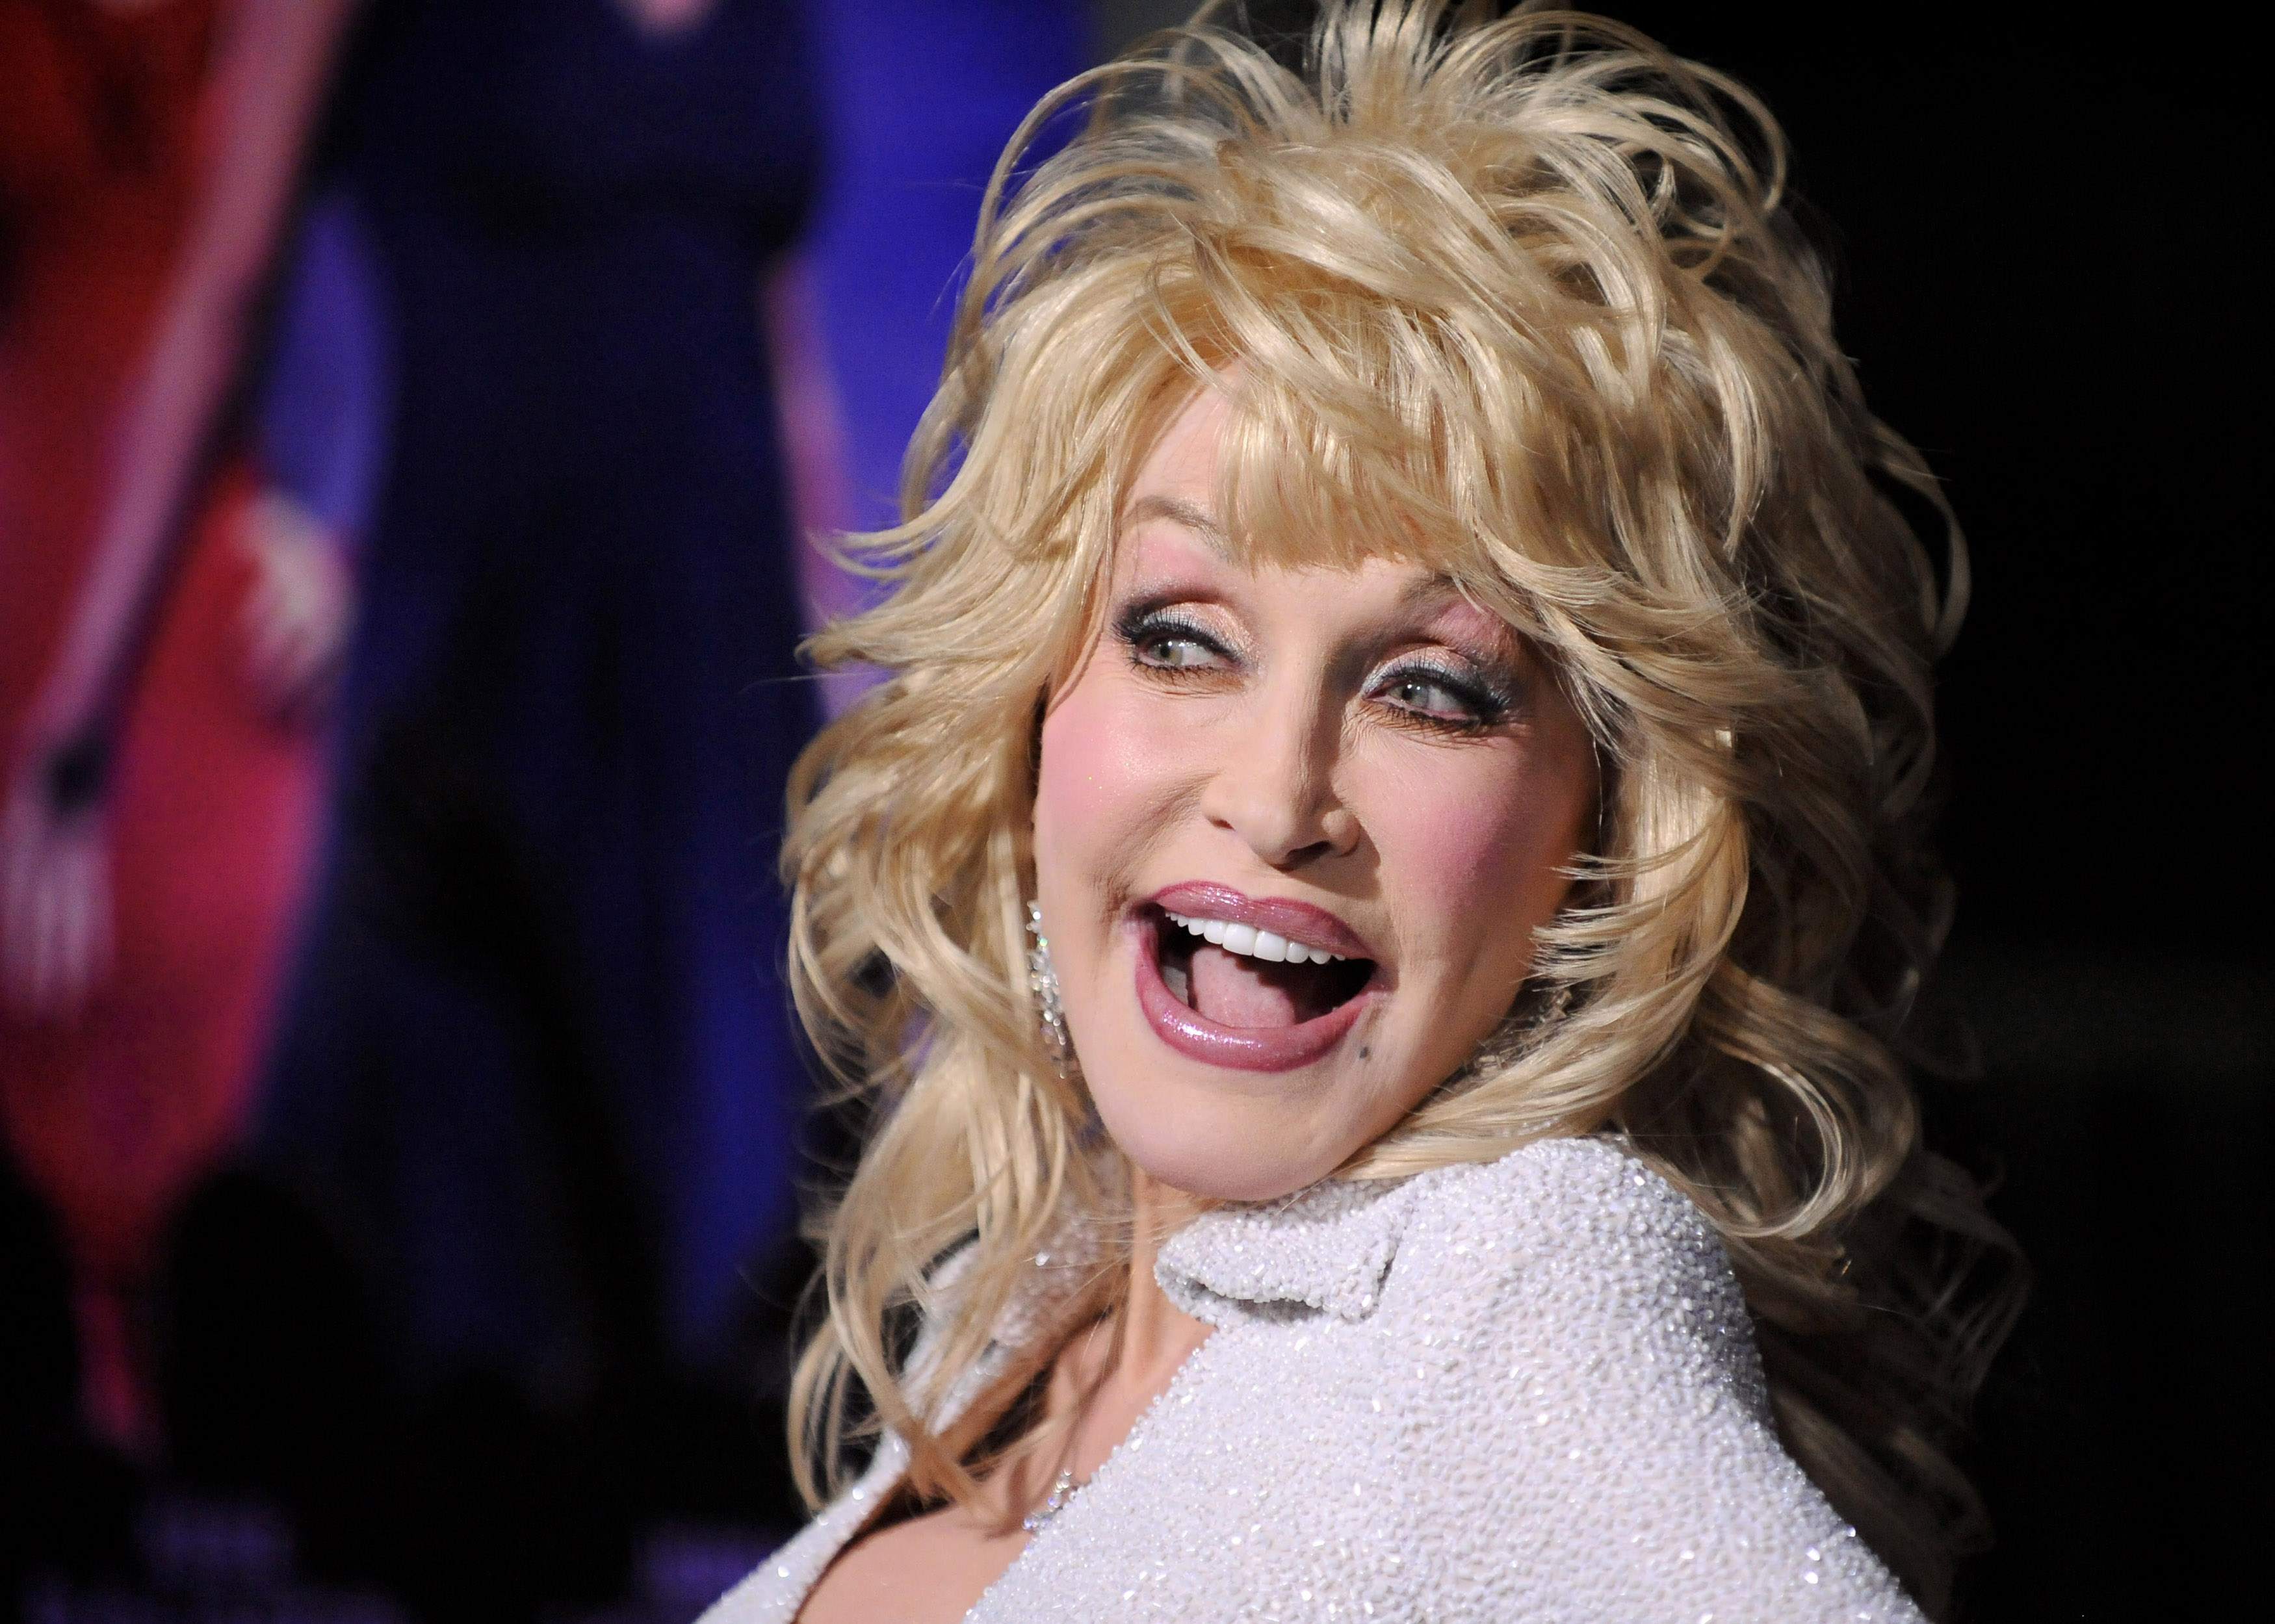 Dolly Parton to renew wedding vows for 50th anniversary to Carl Dean - TODAY.com